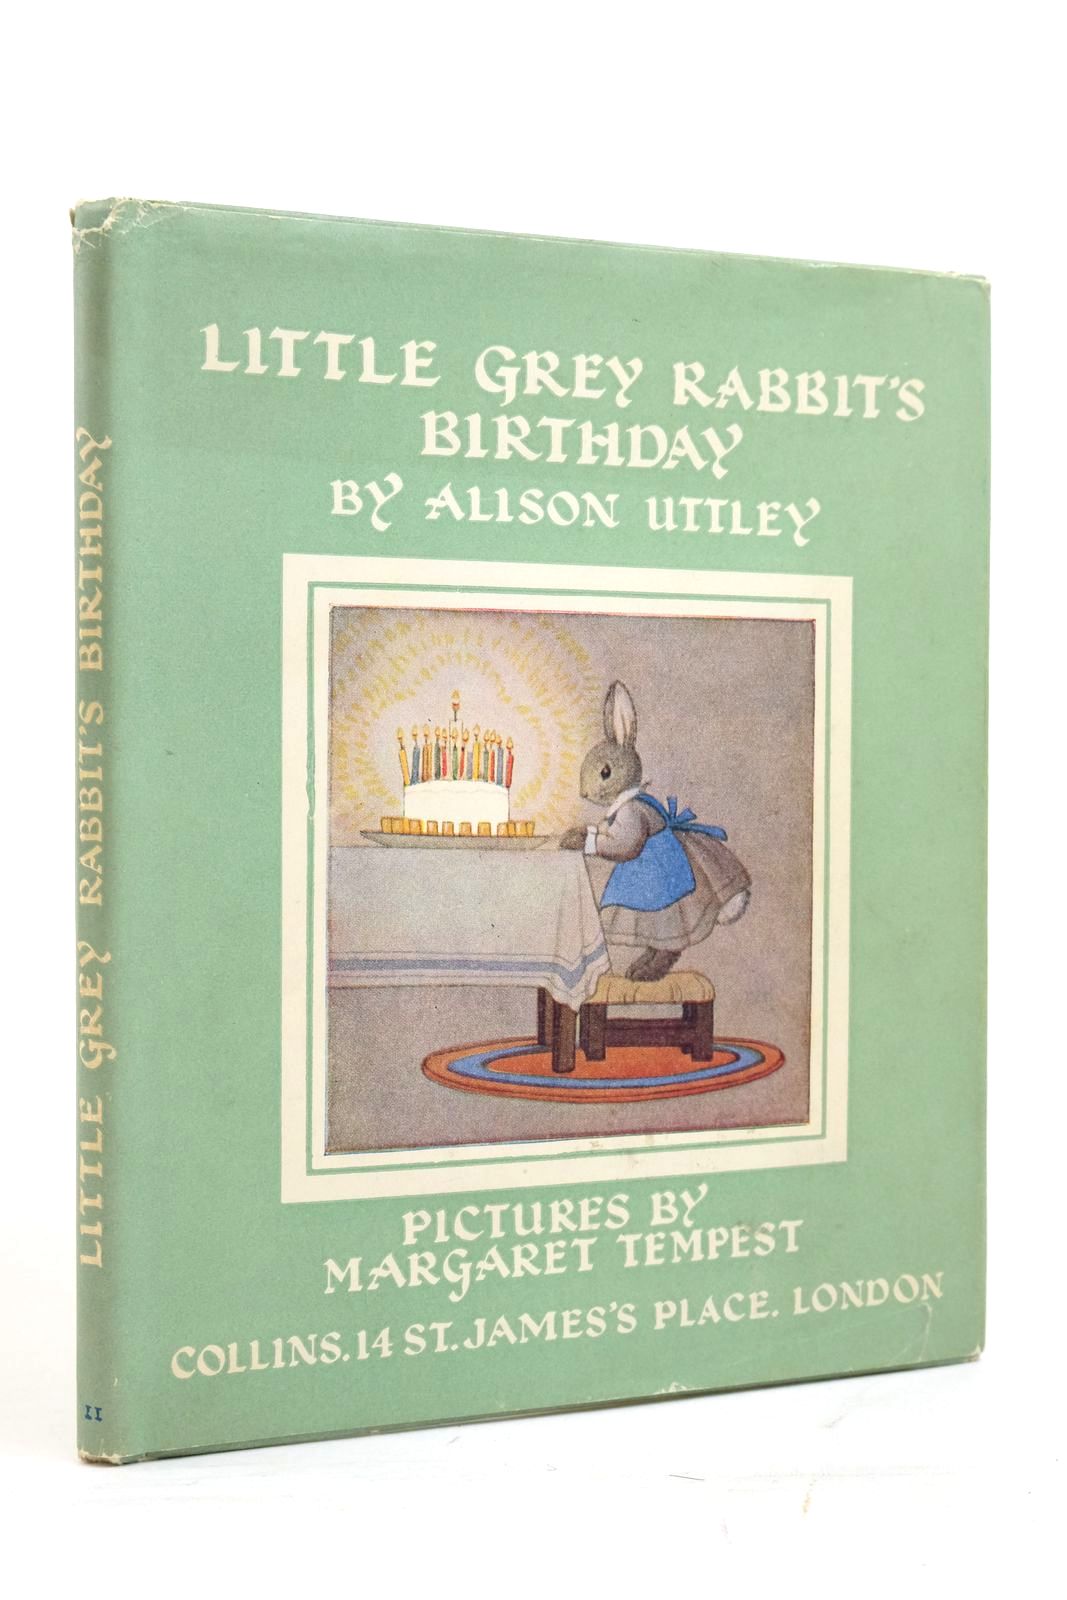 Photo of LITTLE GREY RABBIT'S BIRTHDAY written by Uttley, Alison illustrated by Tempest, Margaret published by Collins (STOCK CODE: 2136889)  for sale by Stella & Rose's Books